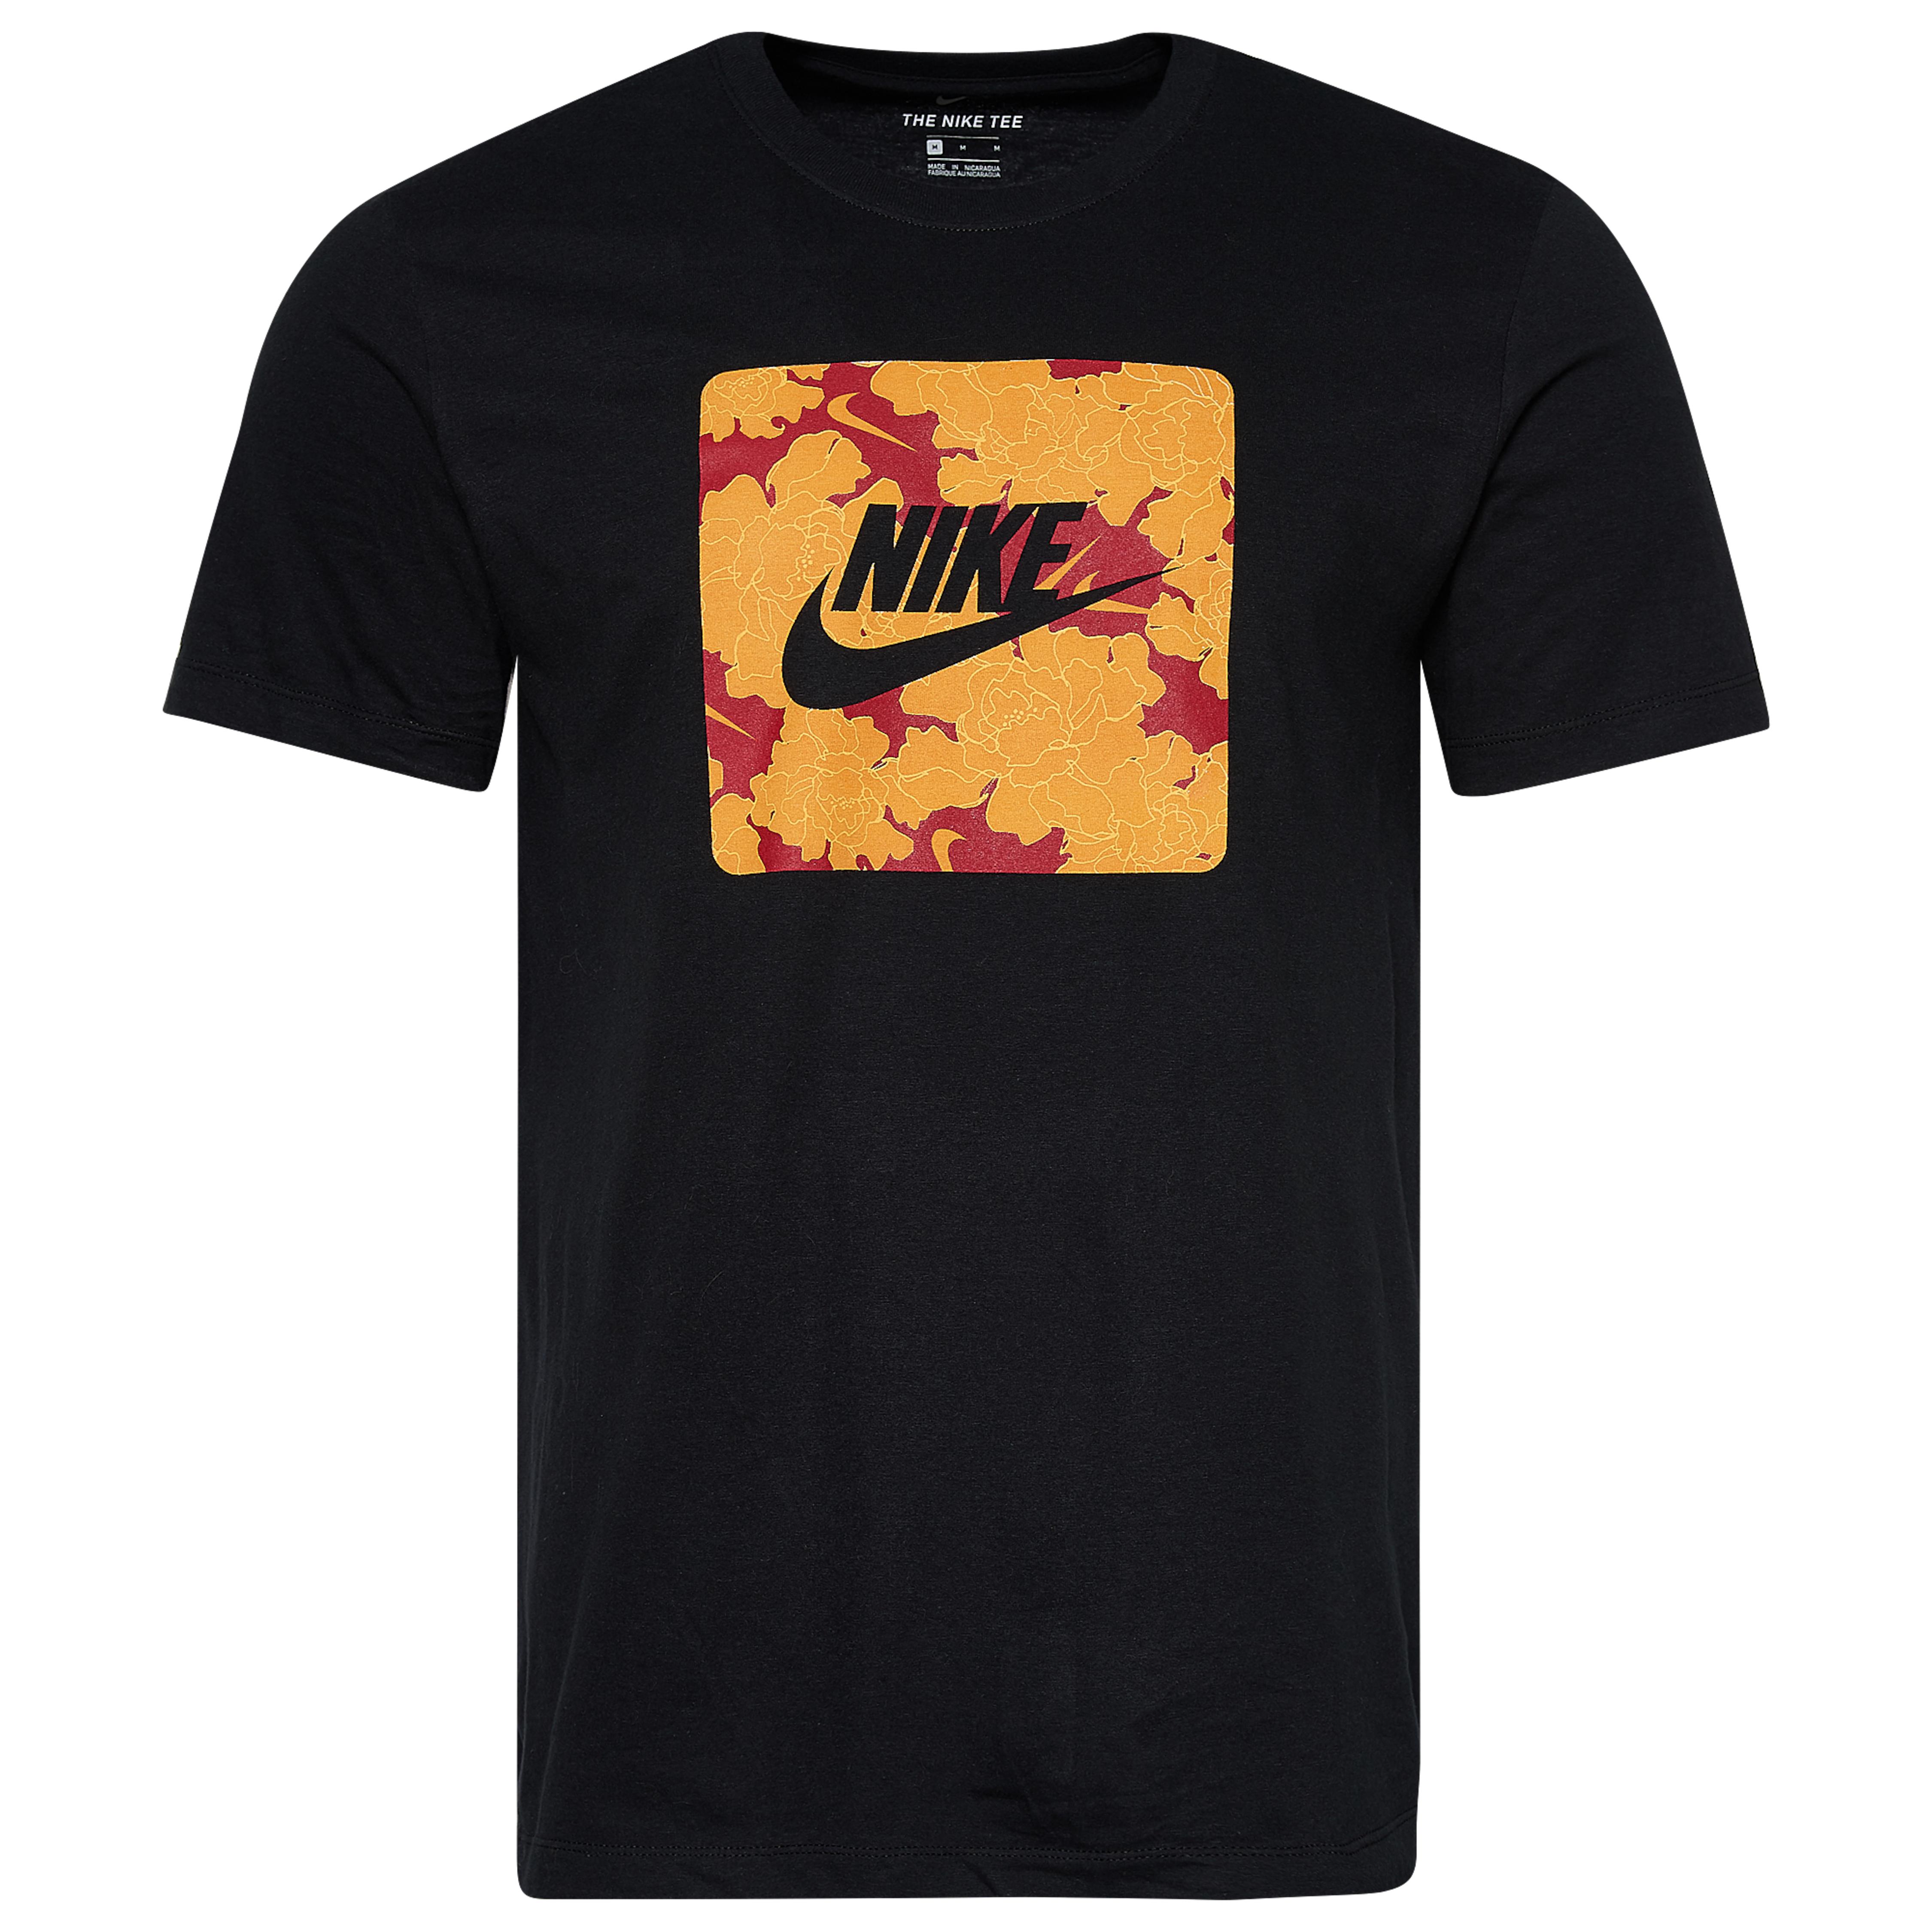 black red and gold nike shirt